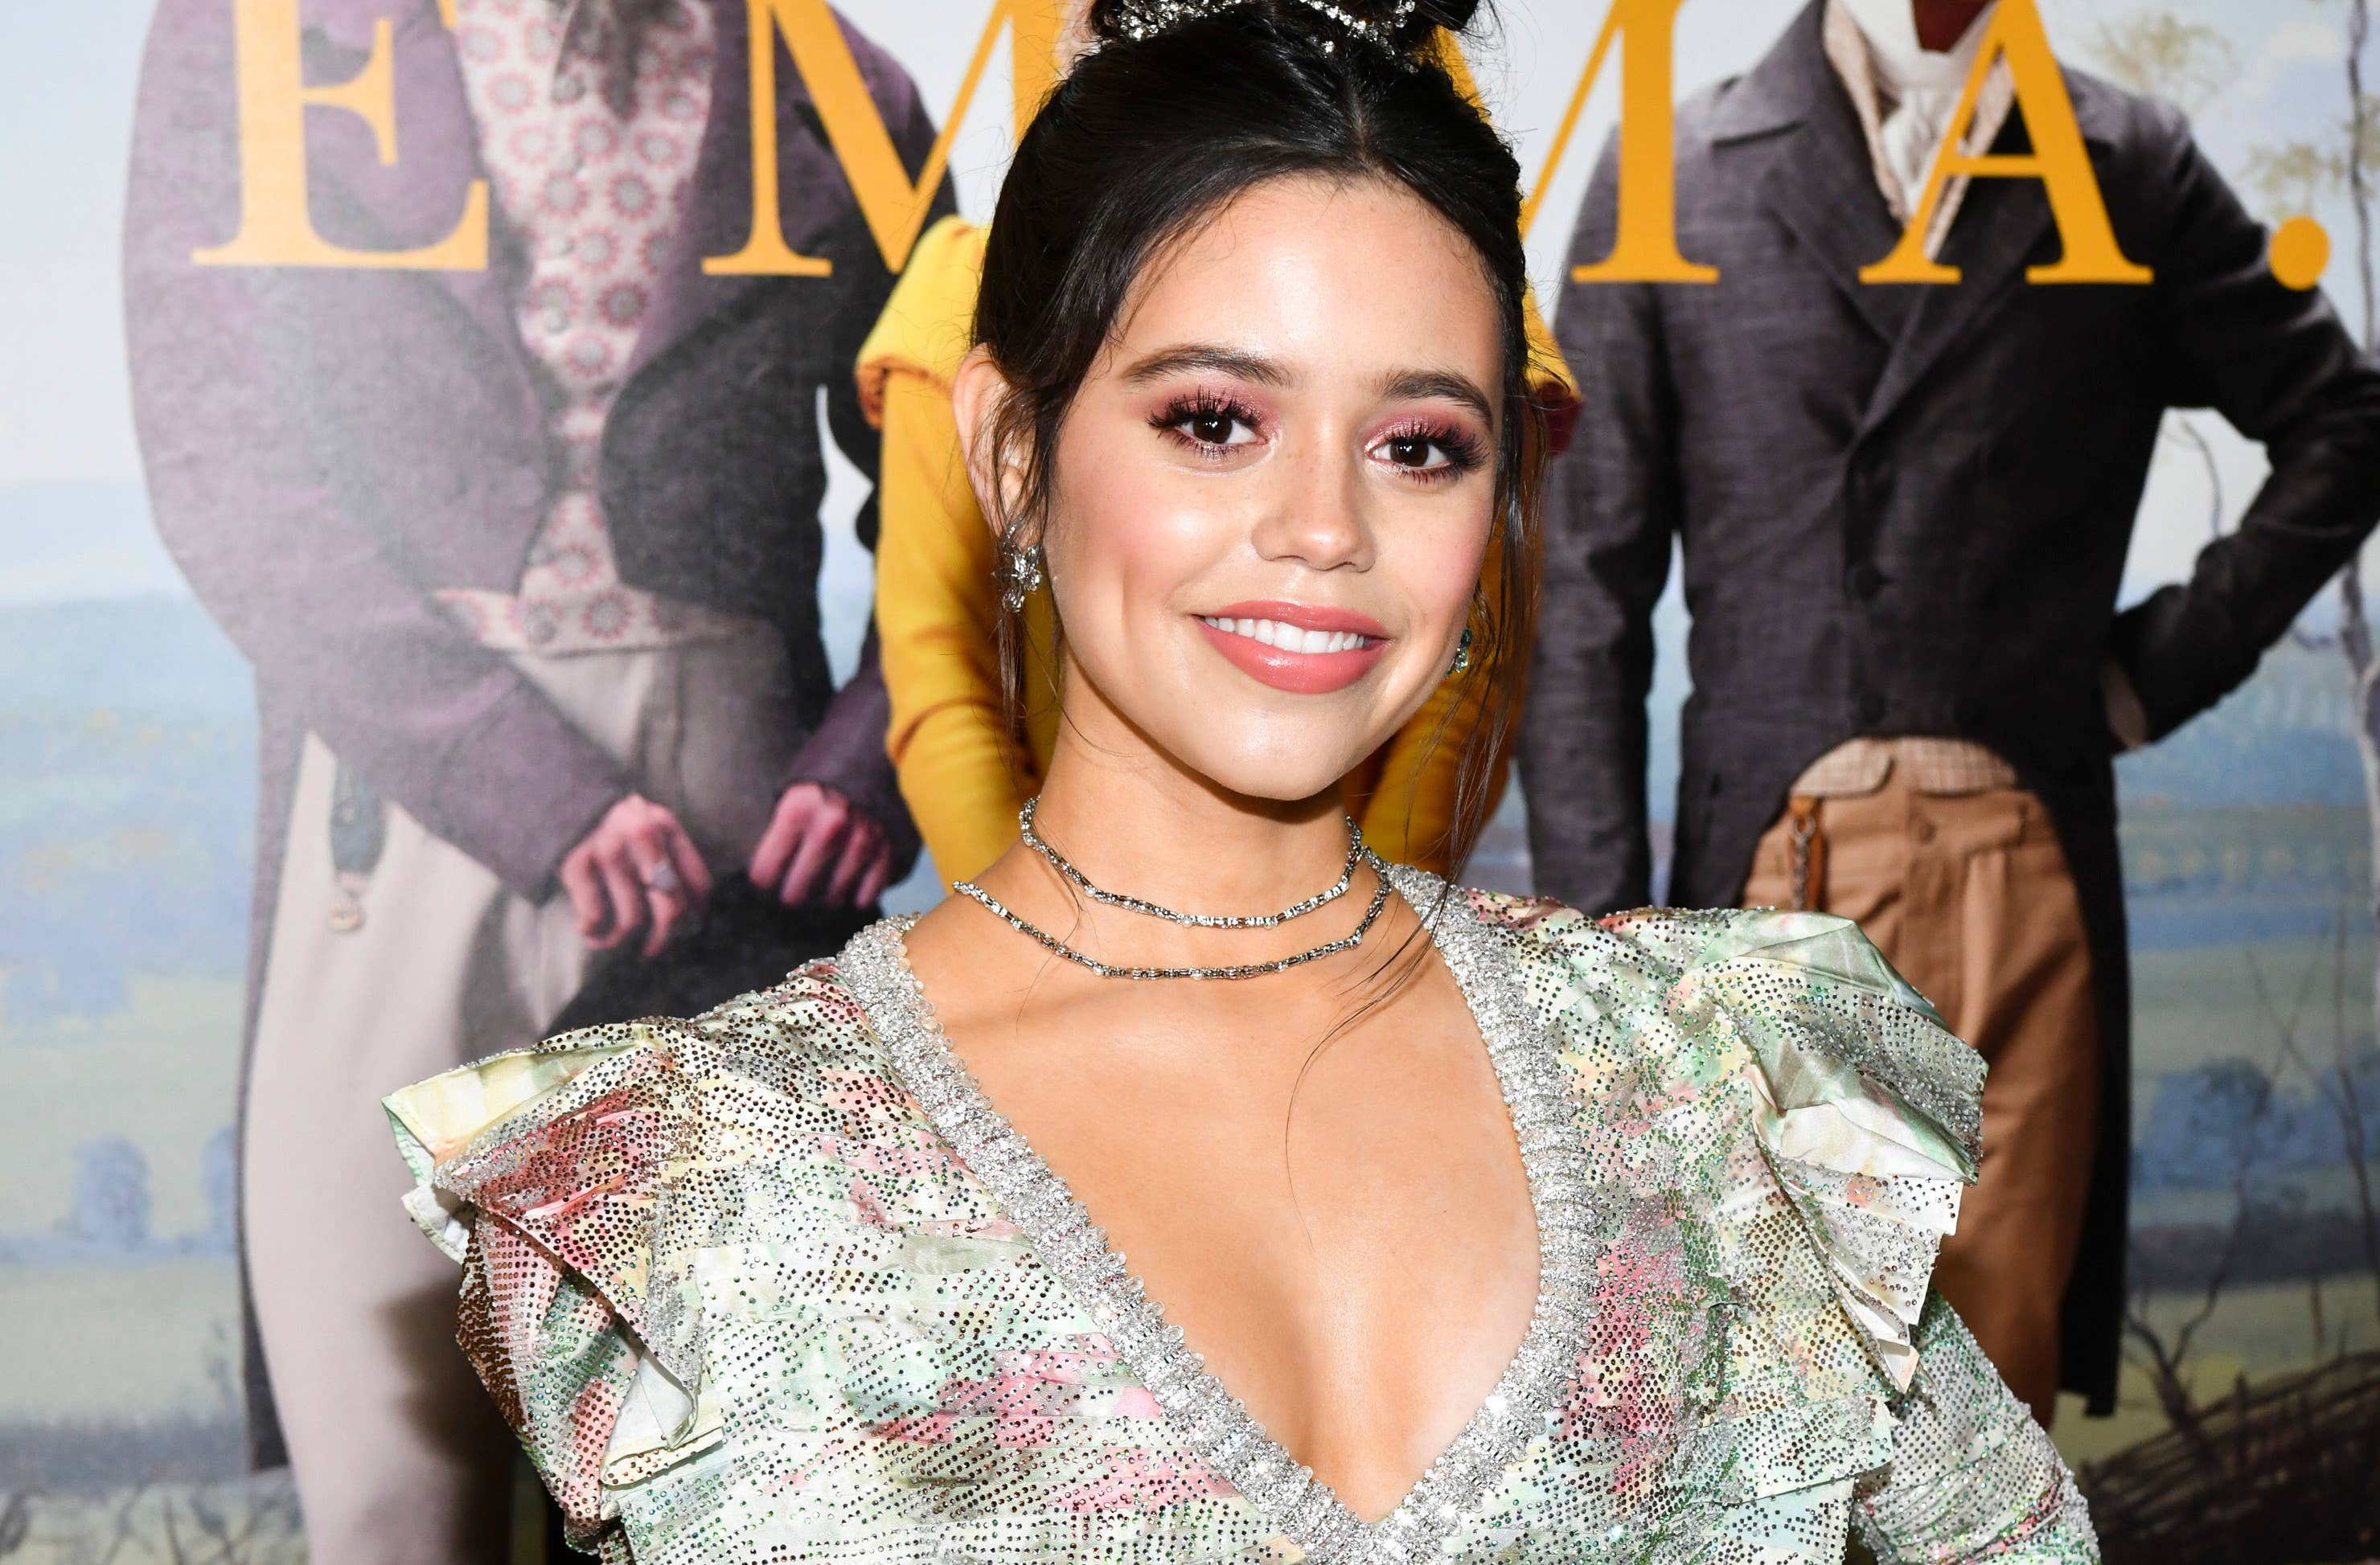 Hollywood Film Xxxx Nd Com - Jenna Ortega Opens Up About Her Role in A24's New Horror Film 'X' | Complex